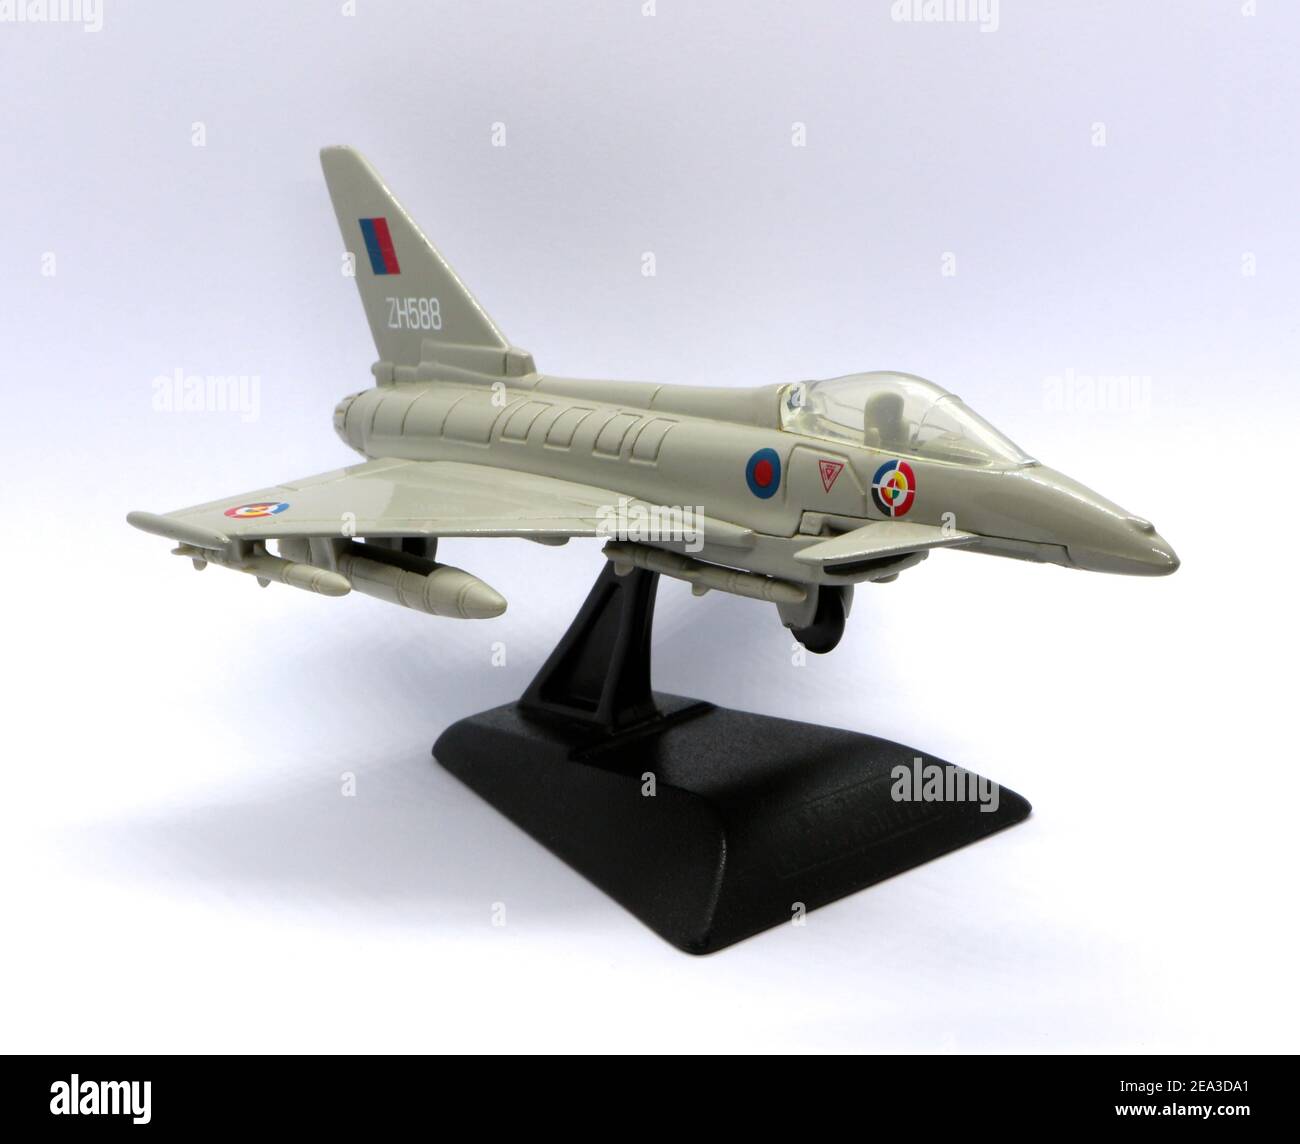 Photo of a Die cast model of a Eurofighter Typhoon multirole fighter on a black plastic stand against a white background Stock Photo